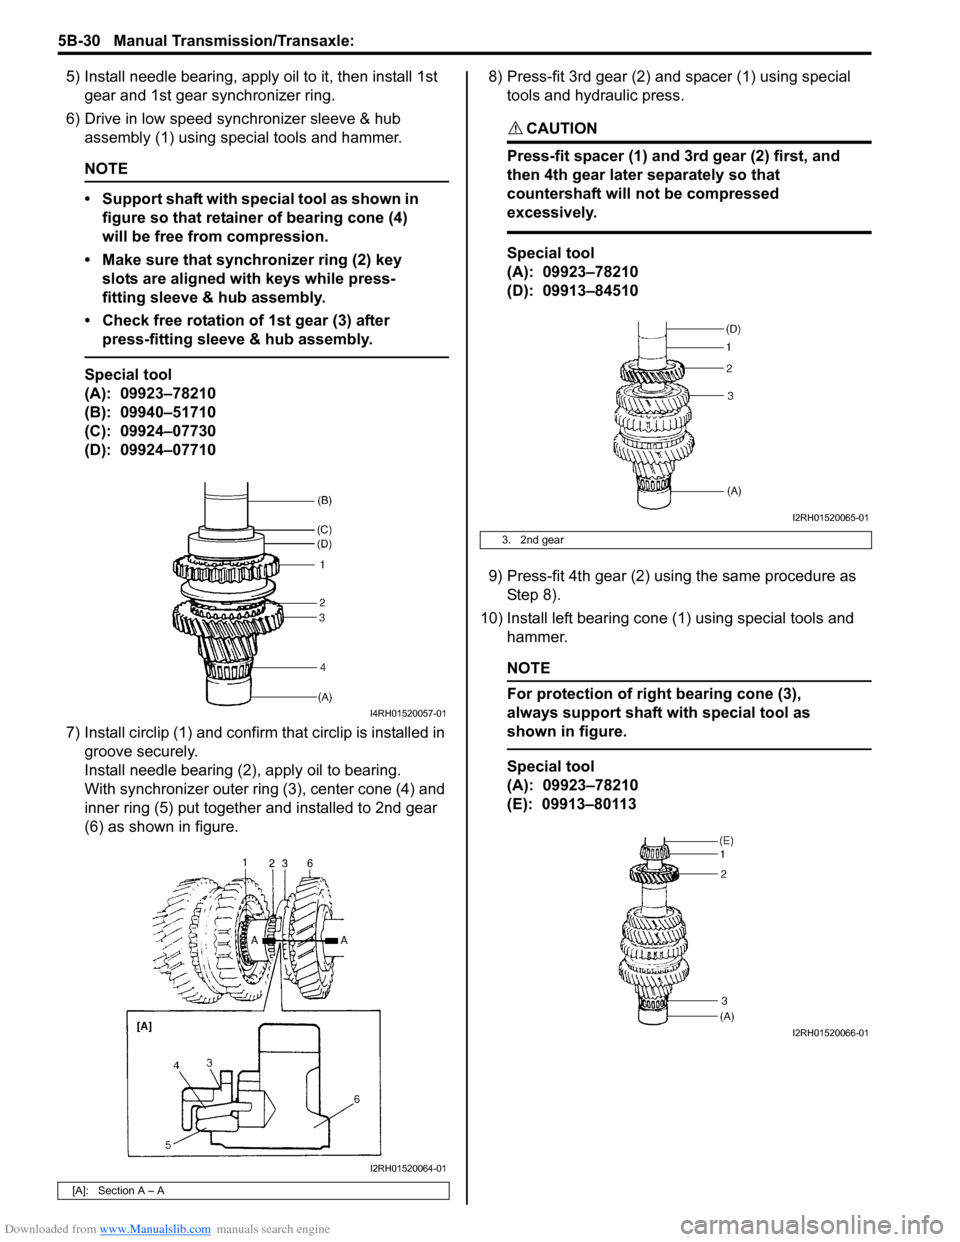 SUZUKI SWIFT 2008 2.G Service Workshop Manual Downloaded from www.Manualslib.com manuals search engine 5B-30 Manual Transmission/Transaxle: 
5) Install needle bearing, apply oil to it, then install 1st gear and 1st gear synchronizer ring.
6) Driv